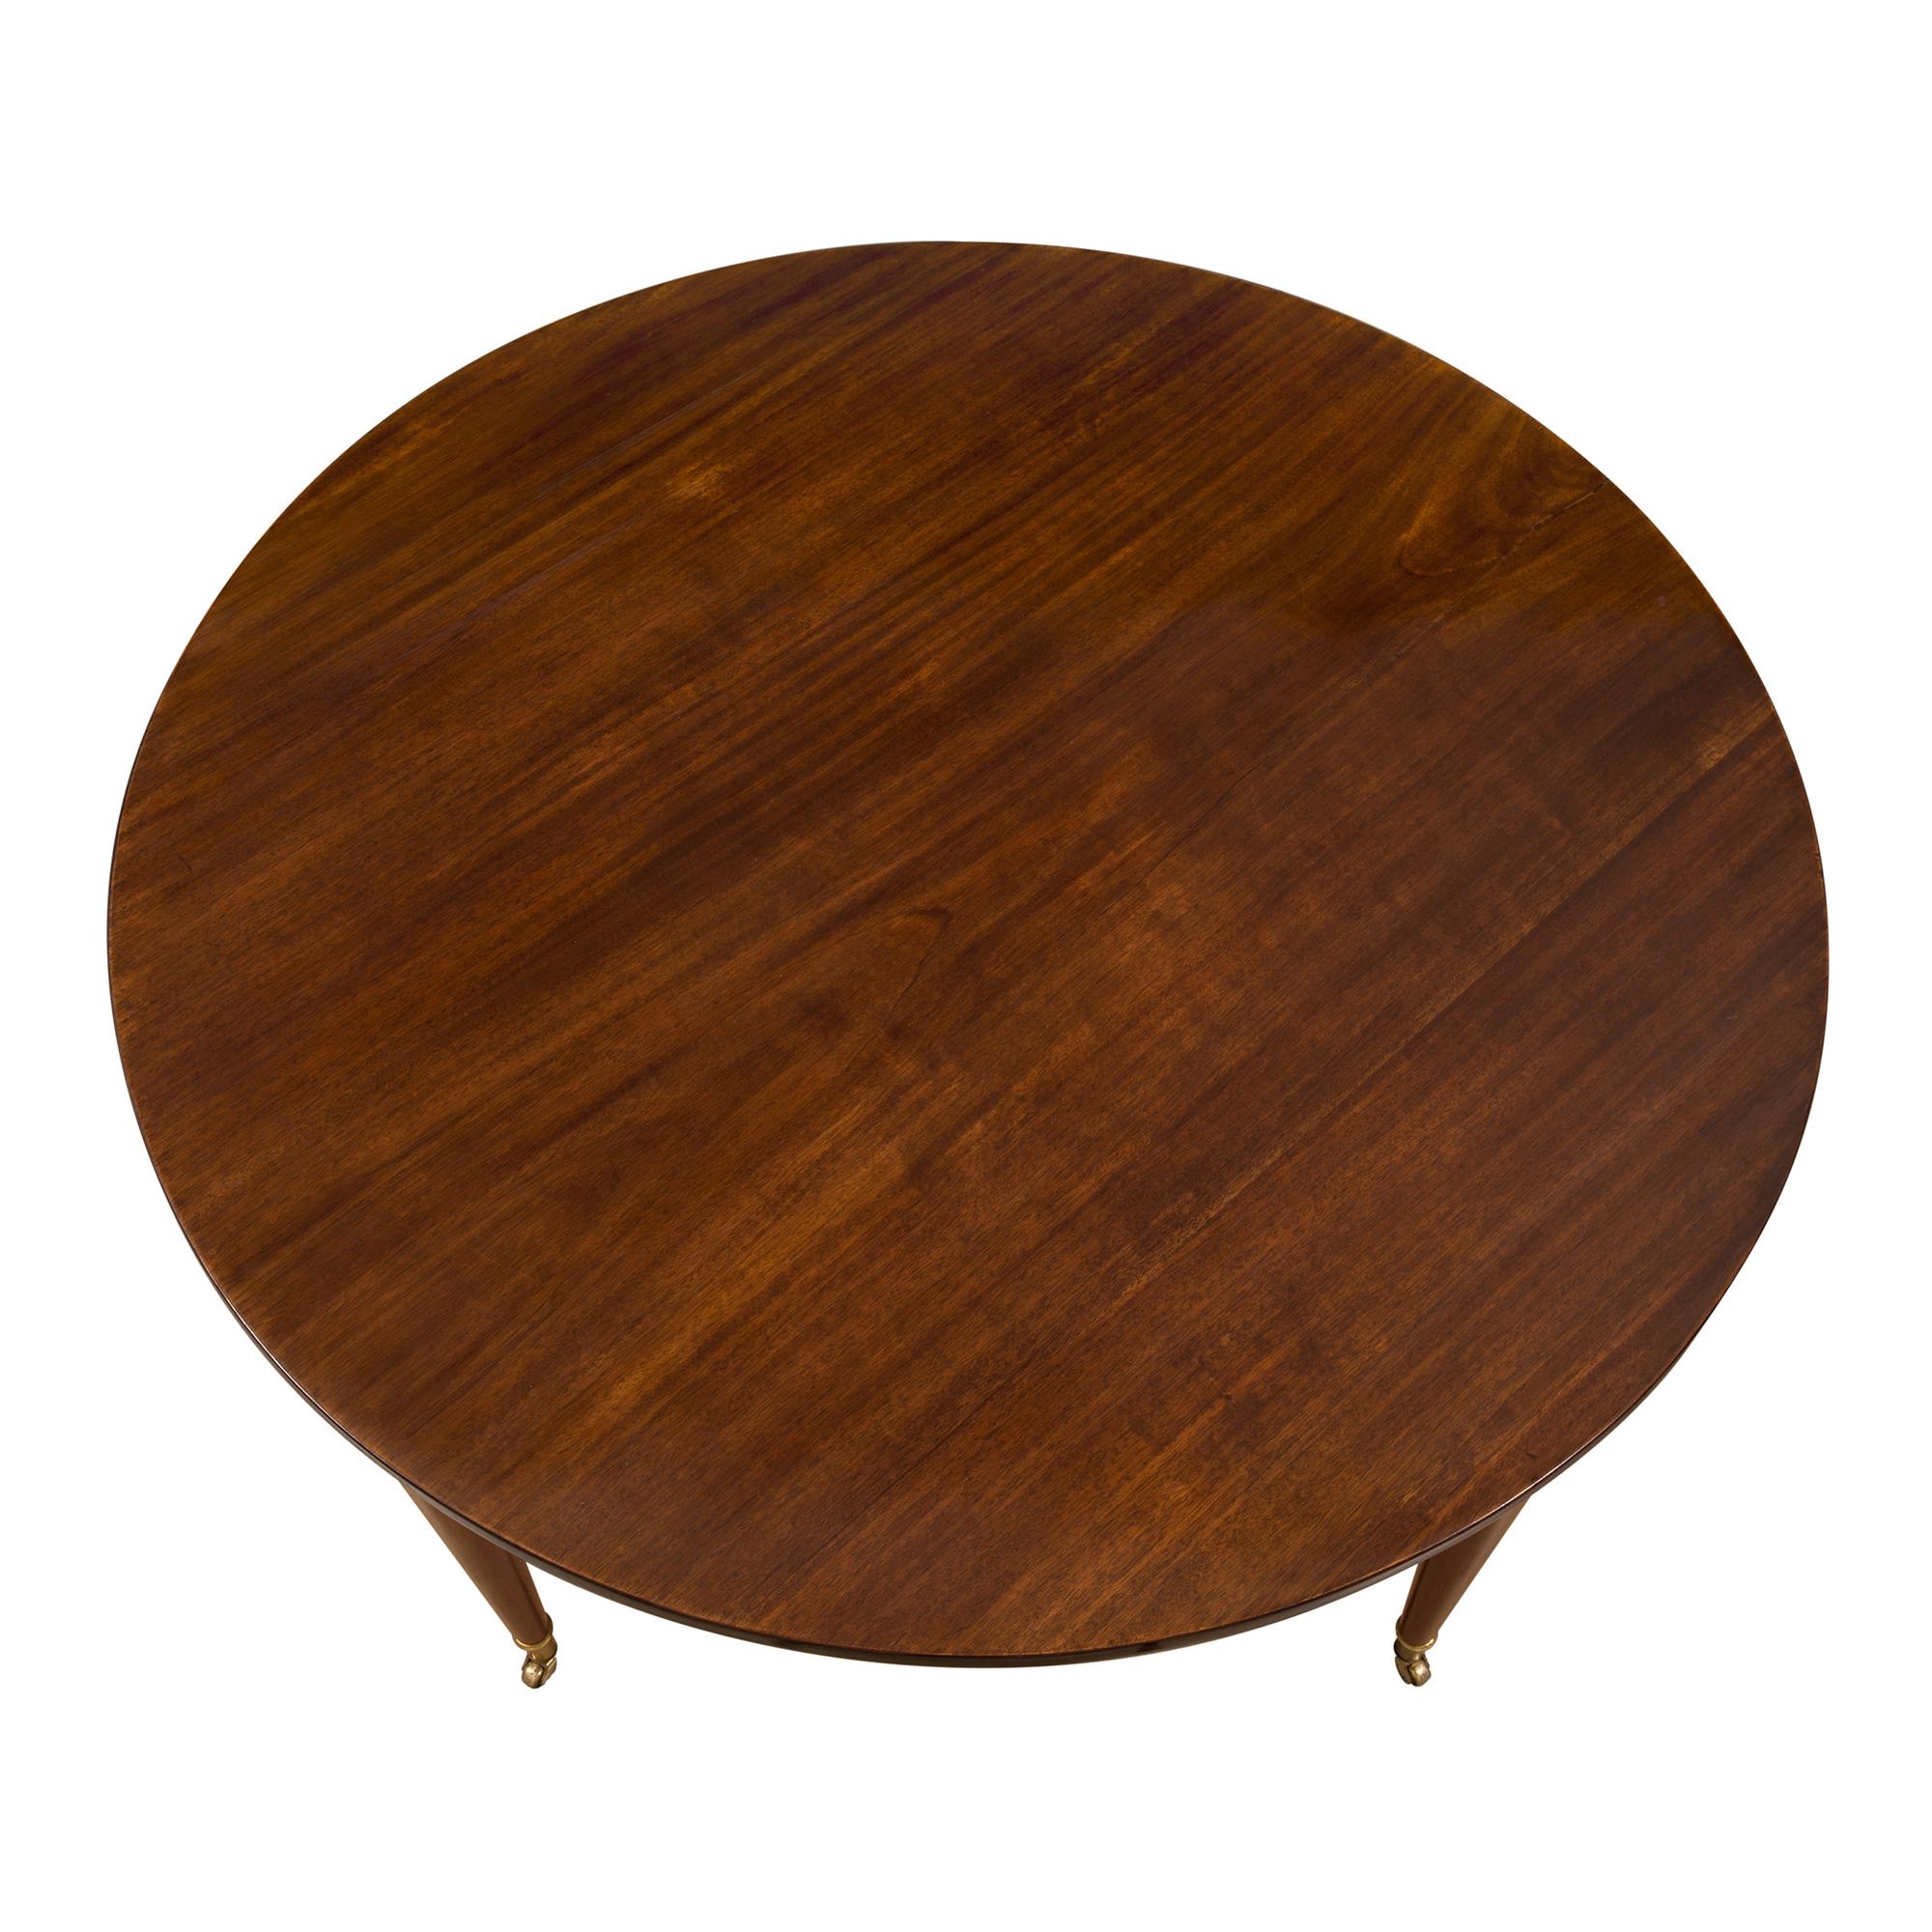 A most elegant French 19th century Neo-Classical st. mahogany center table. The table is raised by fine circular tapered legs with ormolu sabots and their original casters. Above each leg are beautiful ormolu top caps with richly chased foliate and